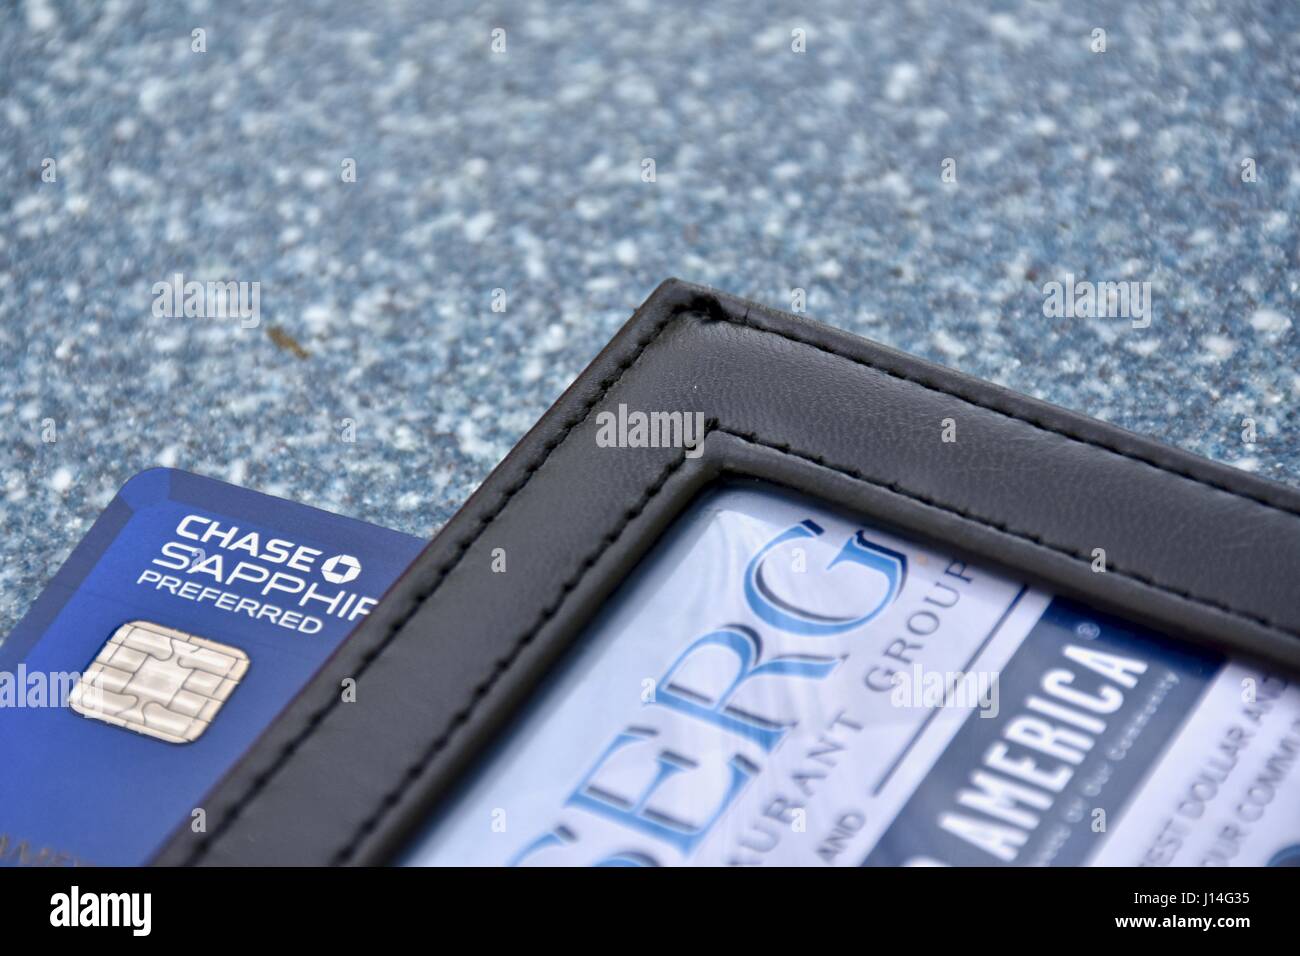 Restaurant bill with Chase Sapphire preferred credit card displayed Stock Photo